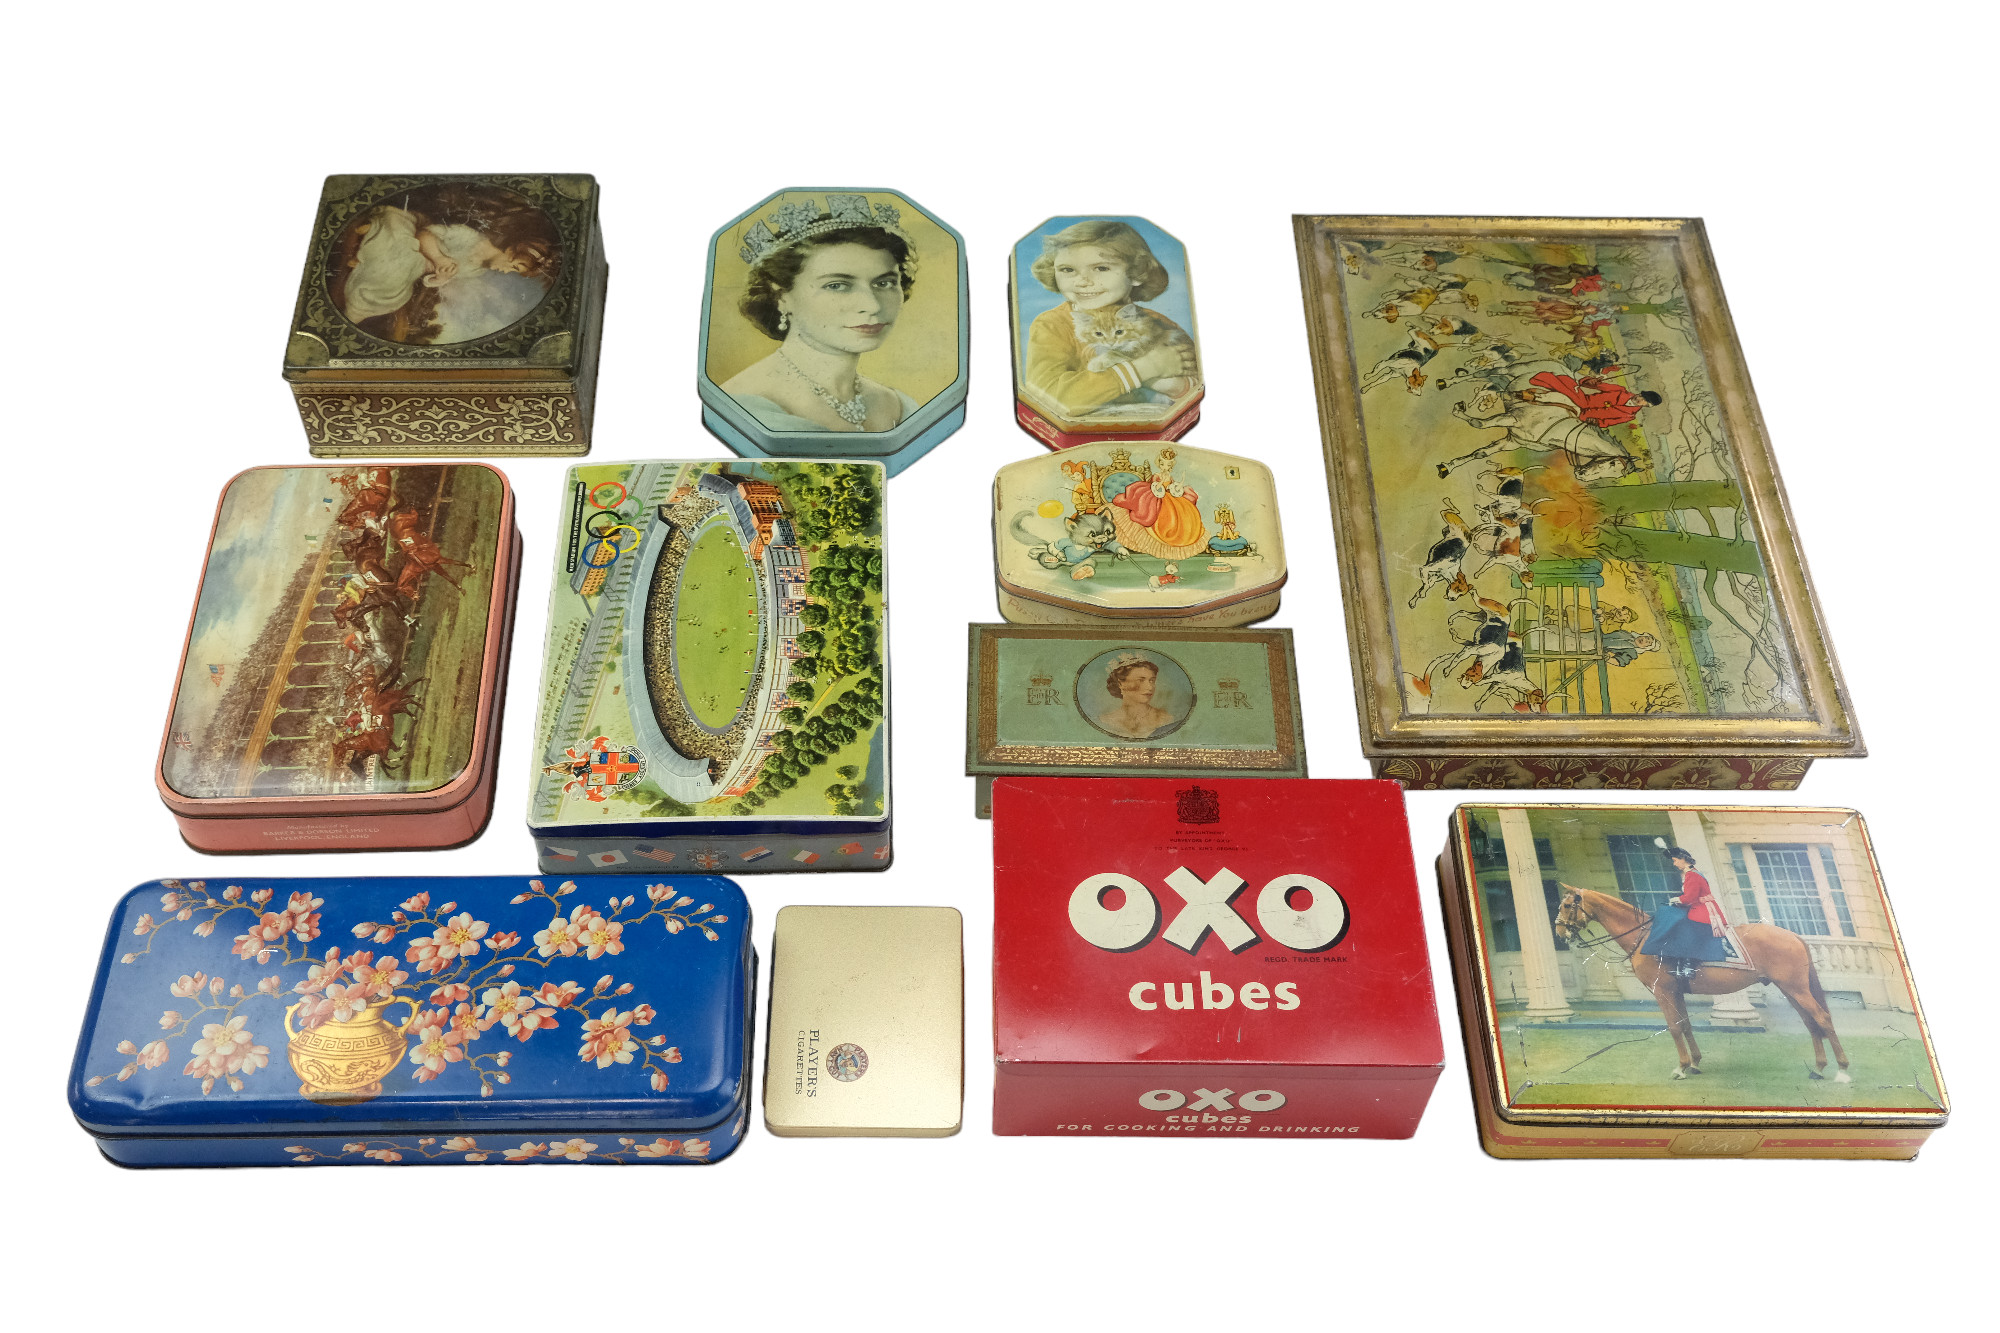 A collection of vintage printed tinplate boxes including a large 1920s Huntley and Palmer biscuits